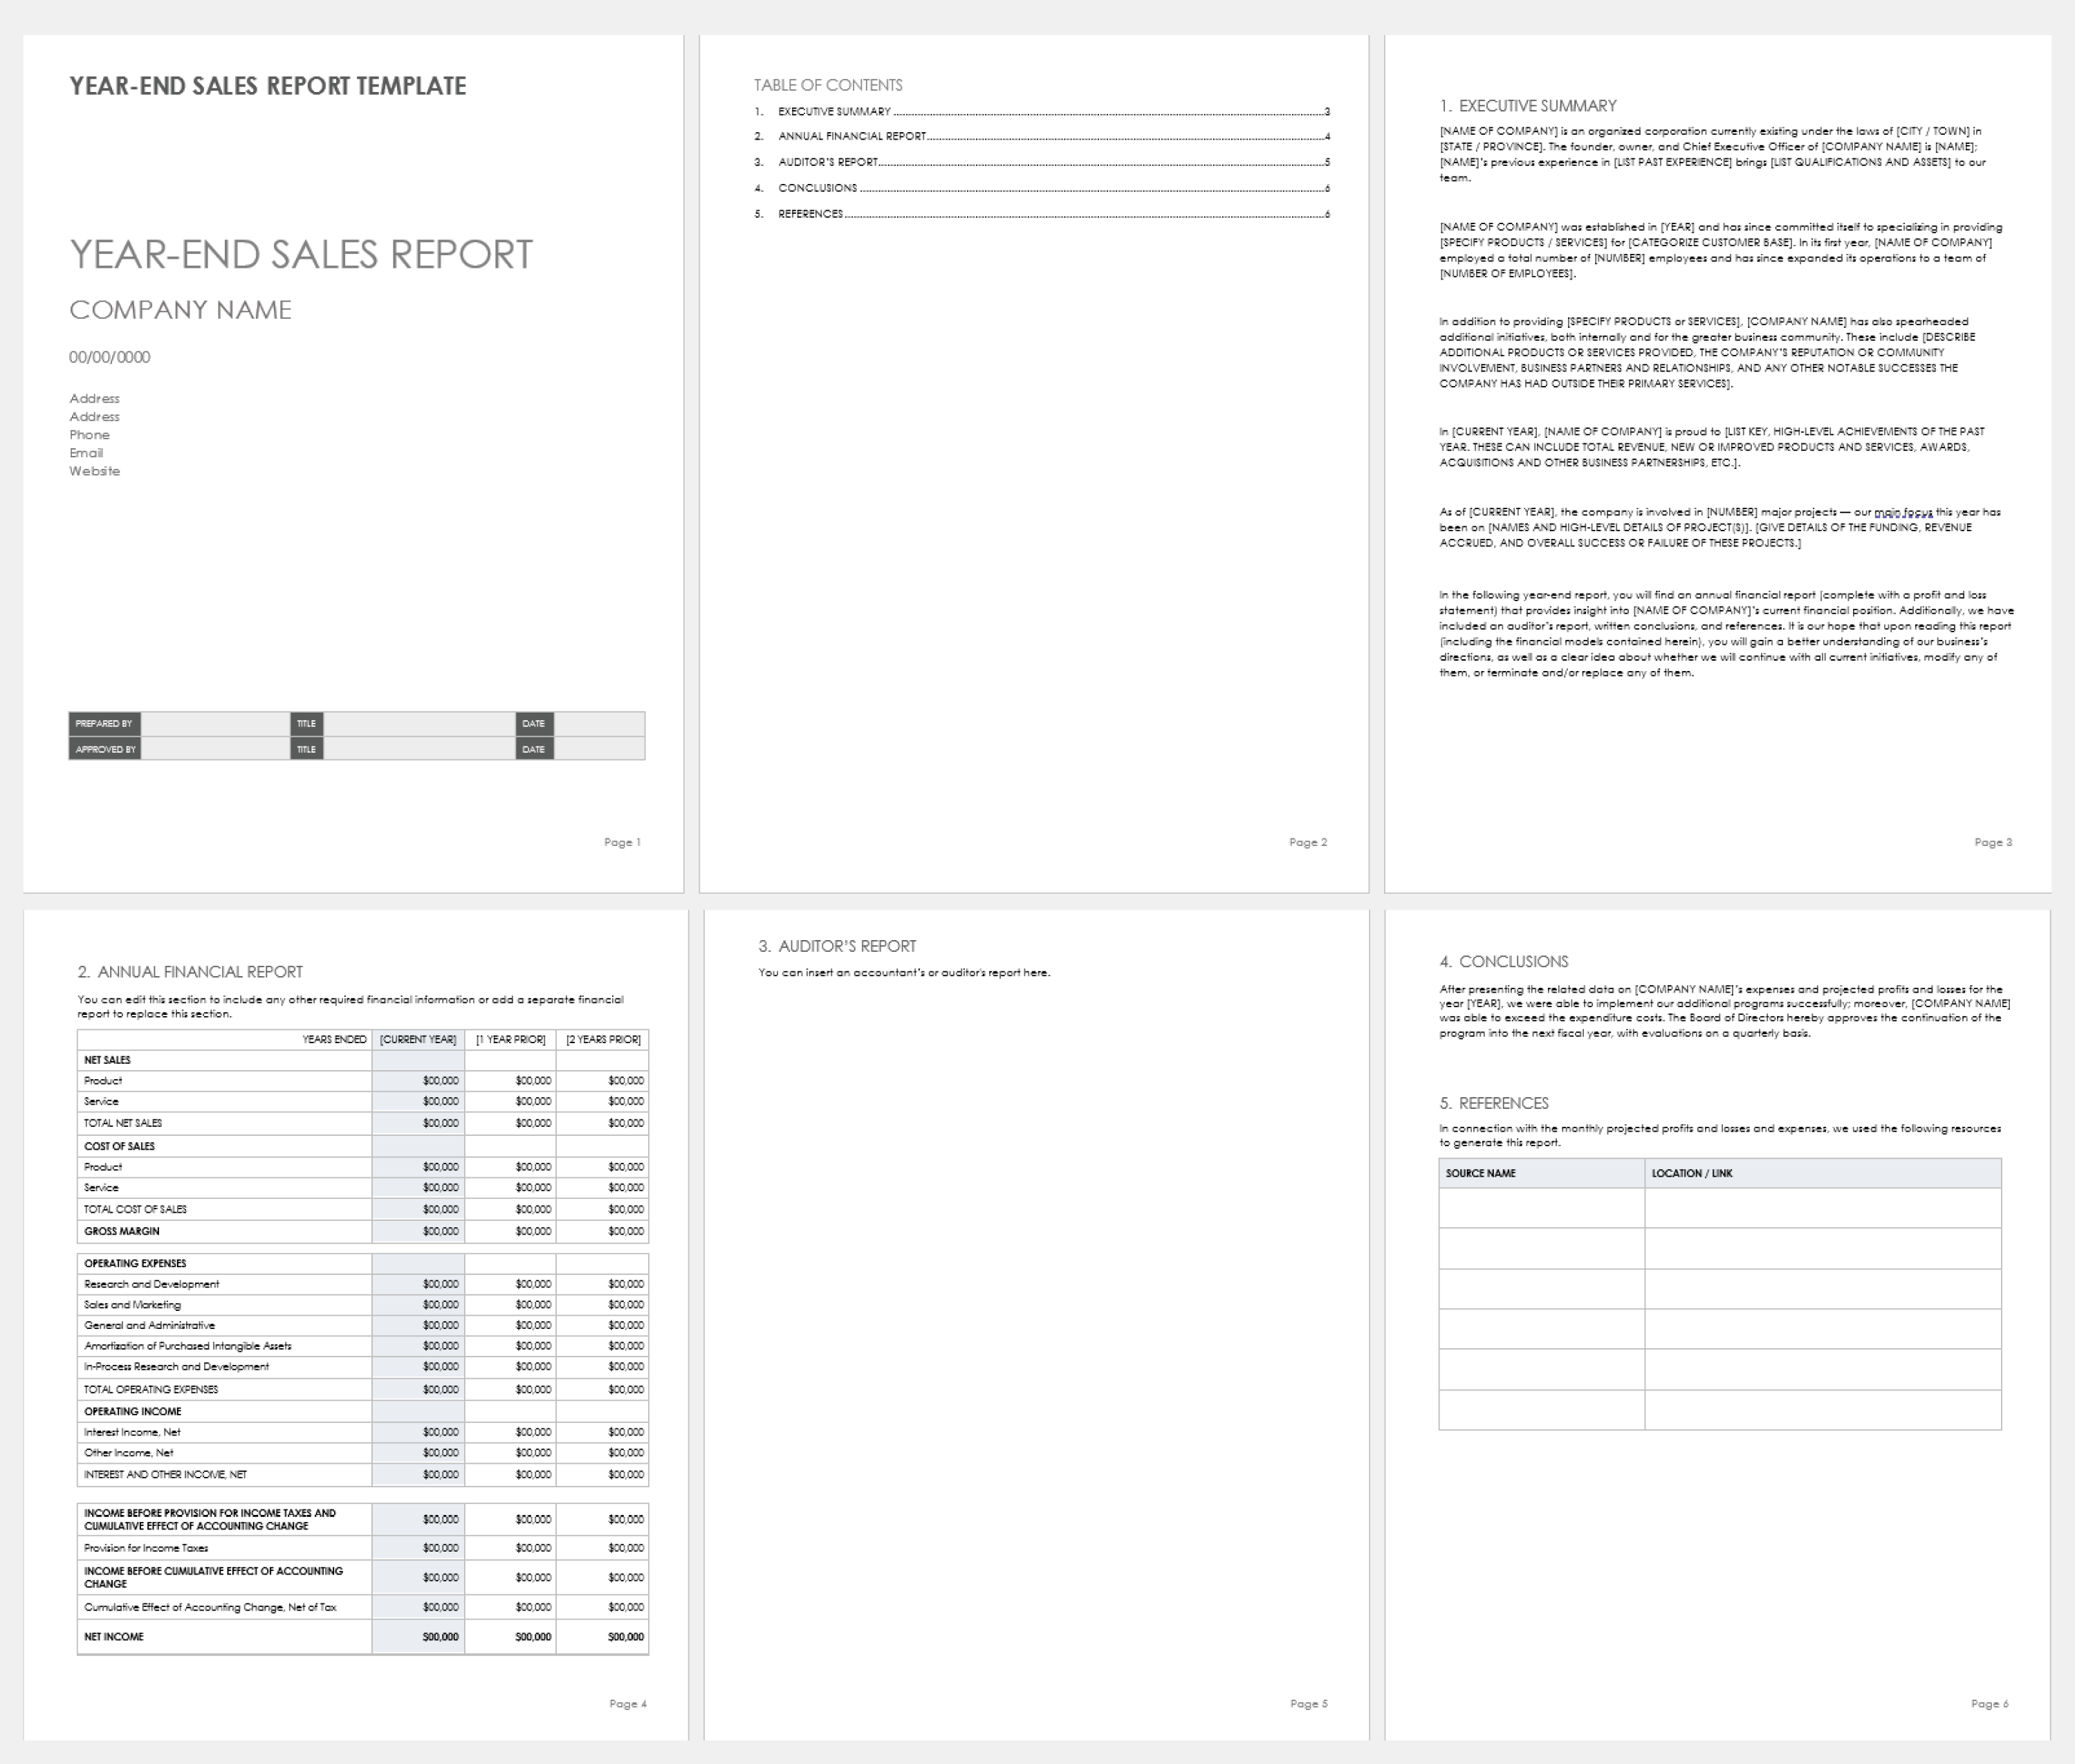 Year-End Sales Report Template